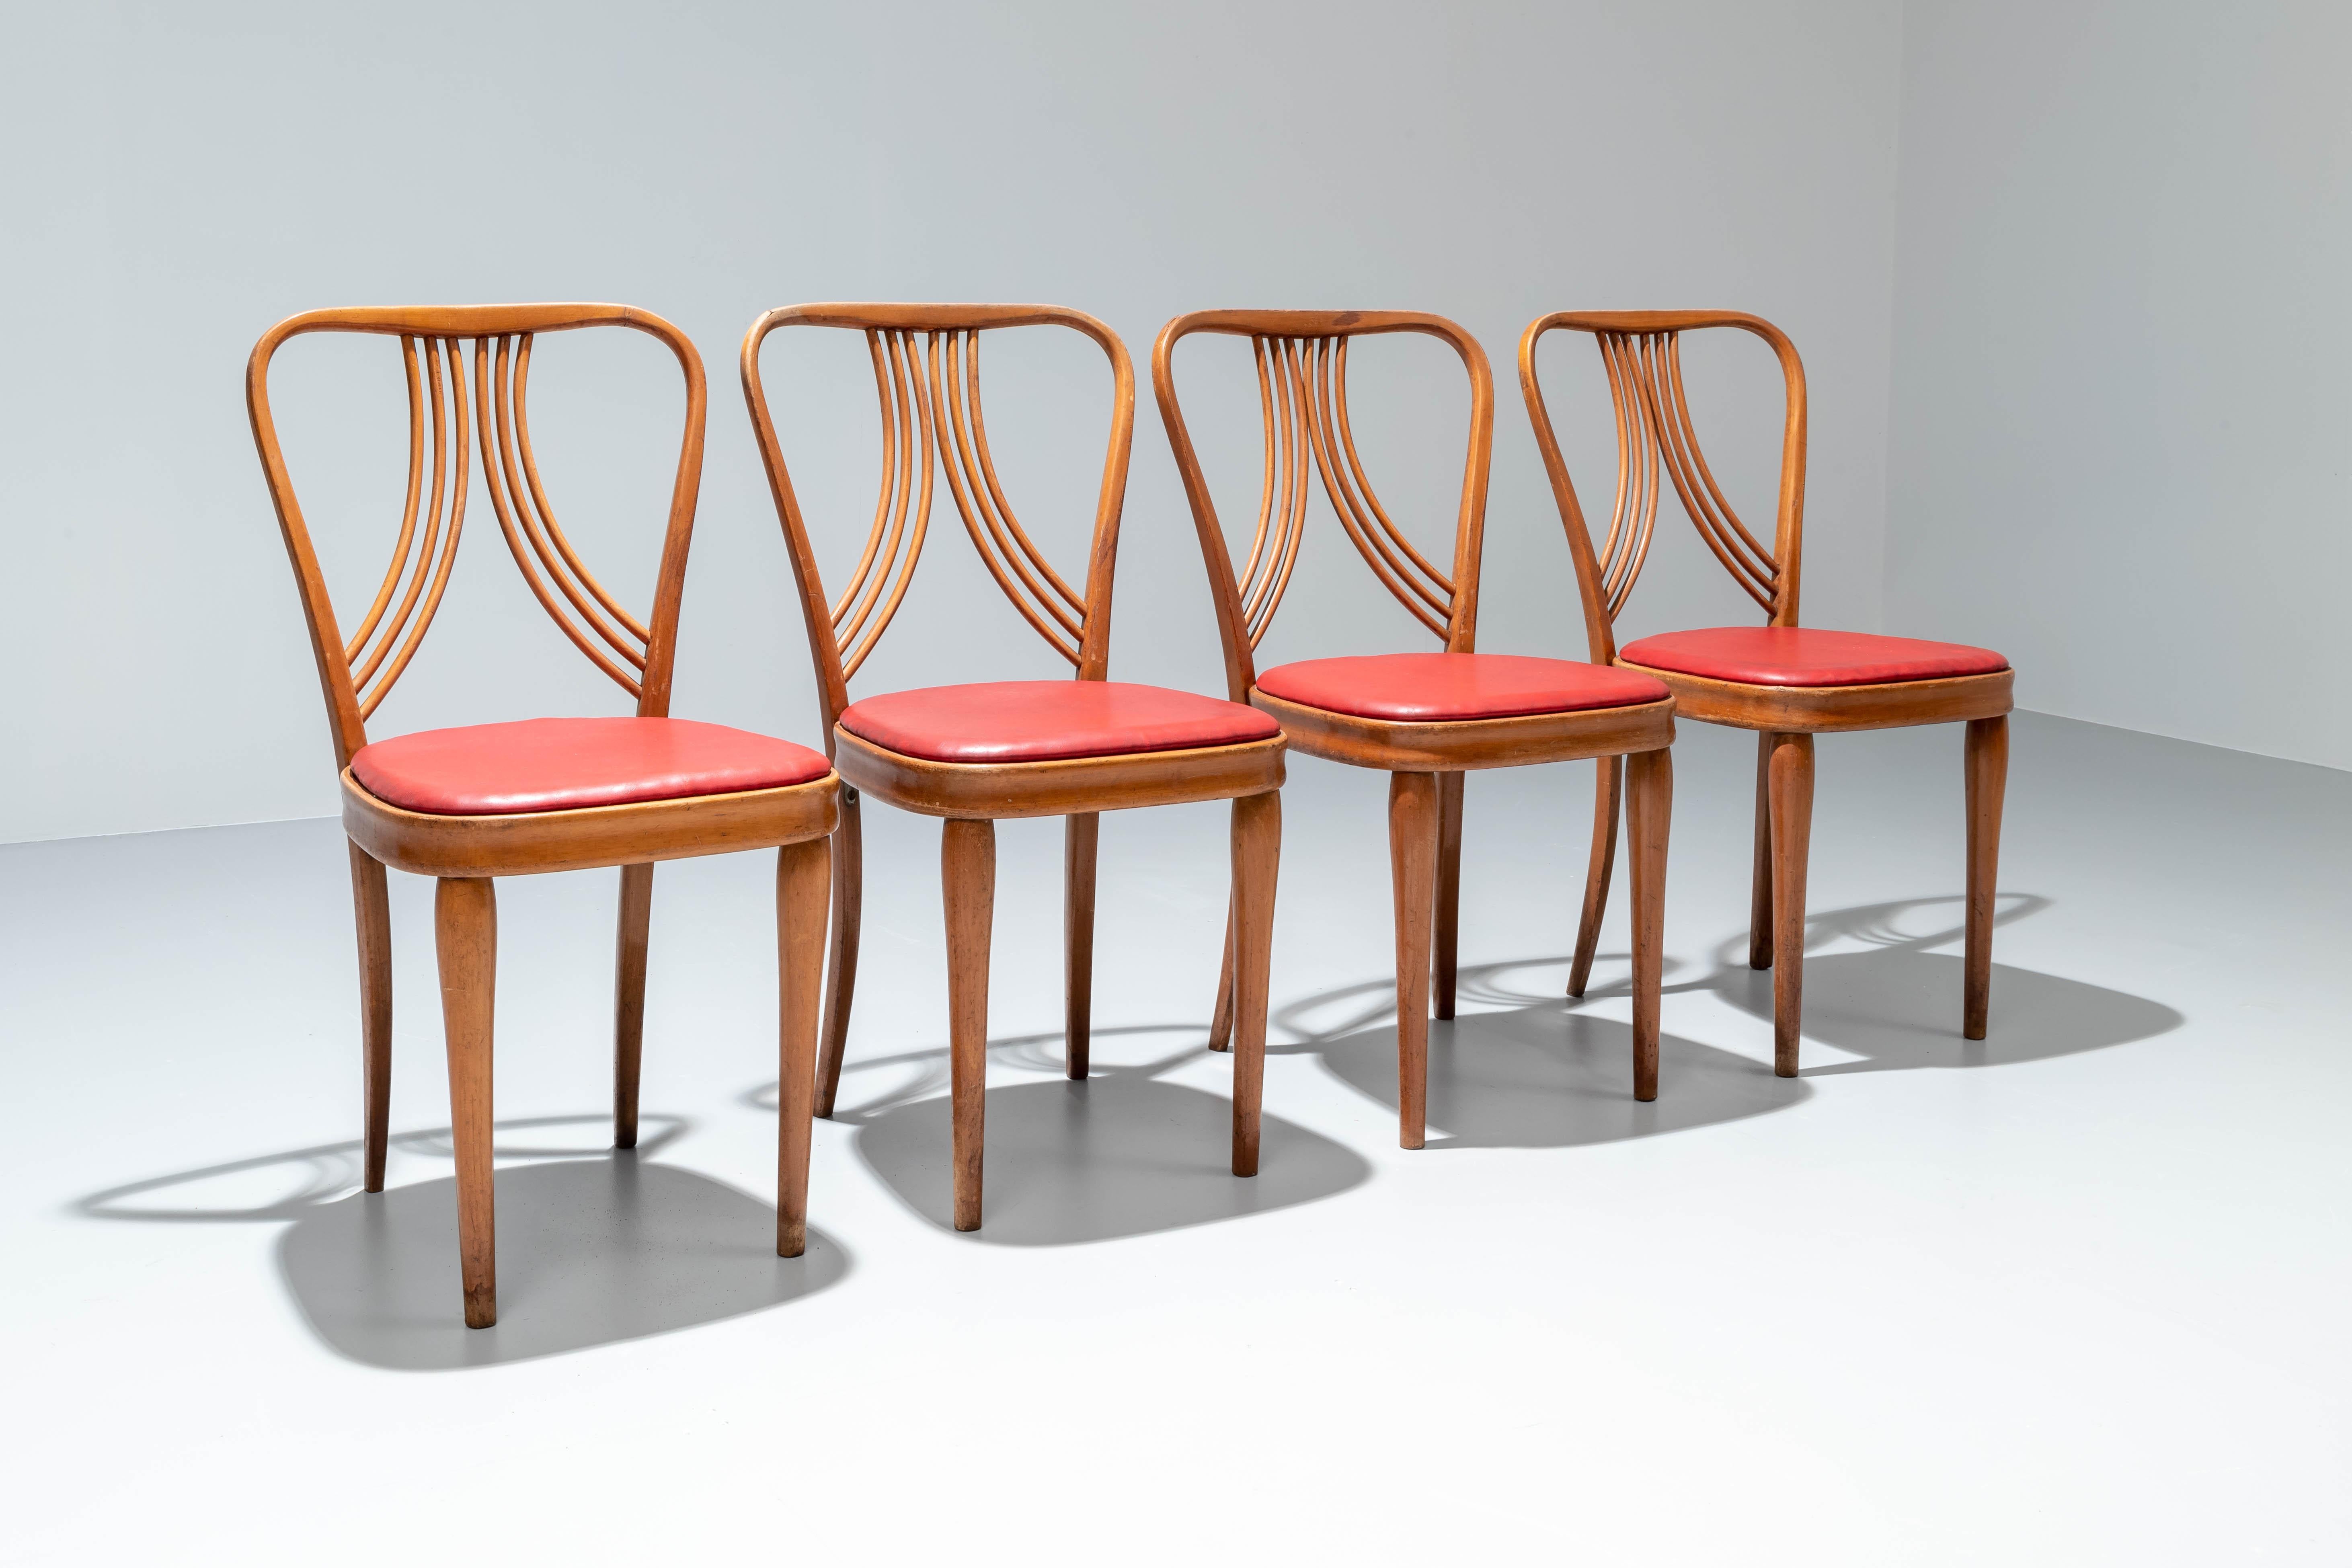 Mid-Century Modern Set of 4 Diningroom Chairs in Blond Wood and Red Faux Leather, Italy, 1950's For Sale